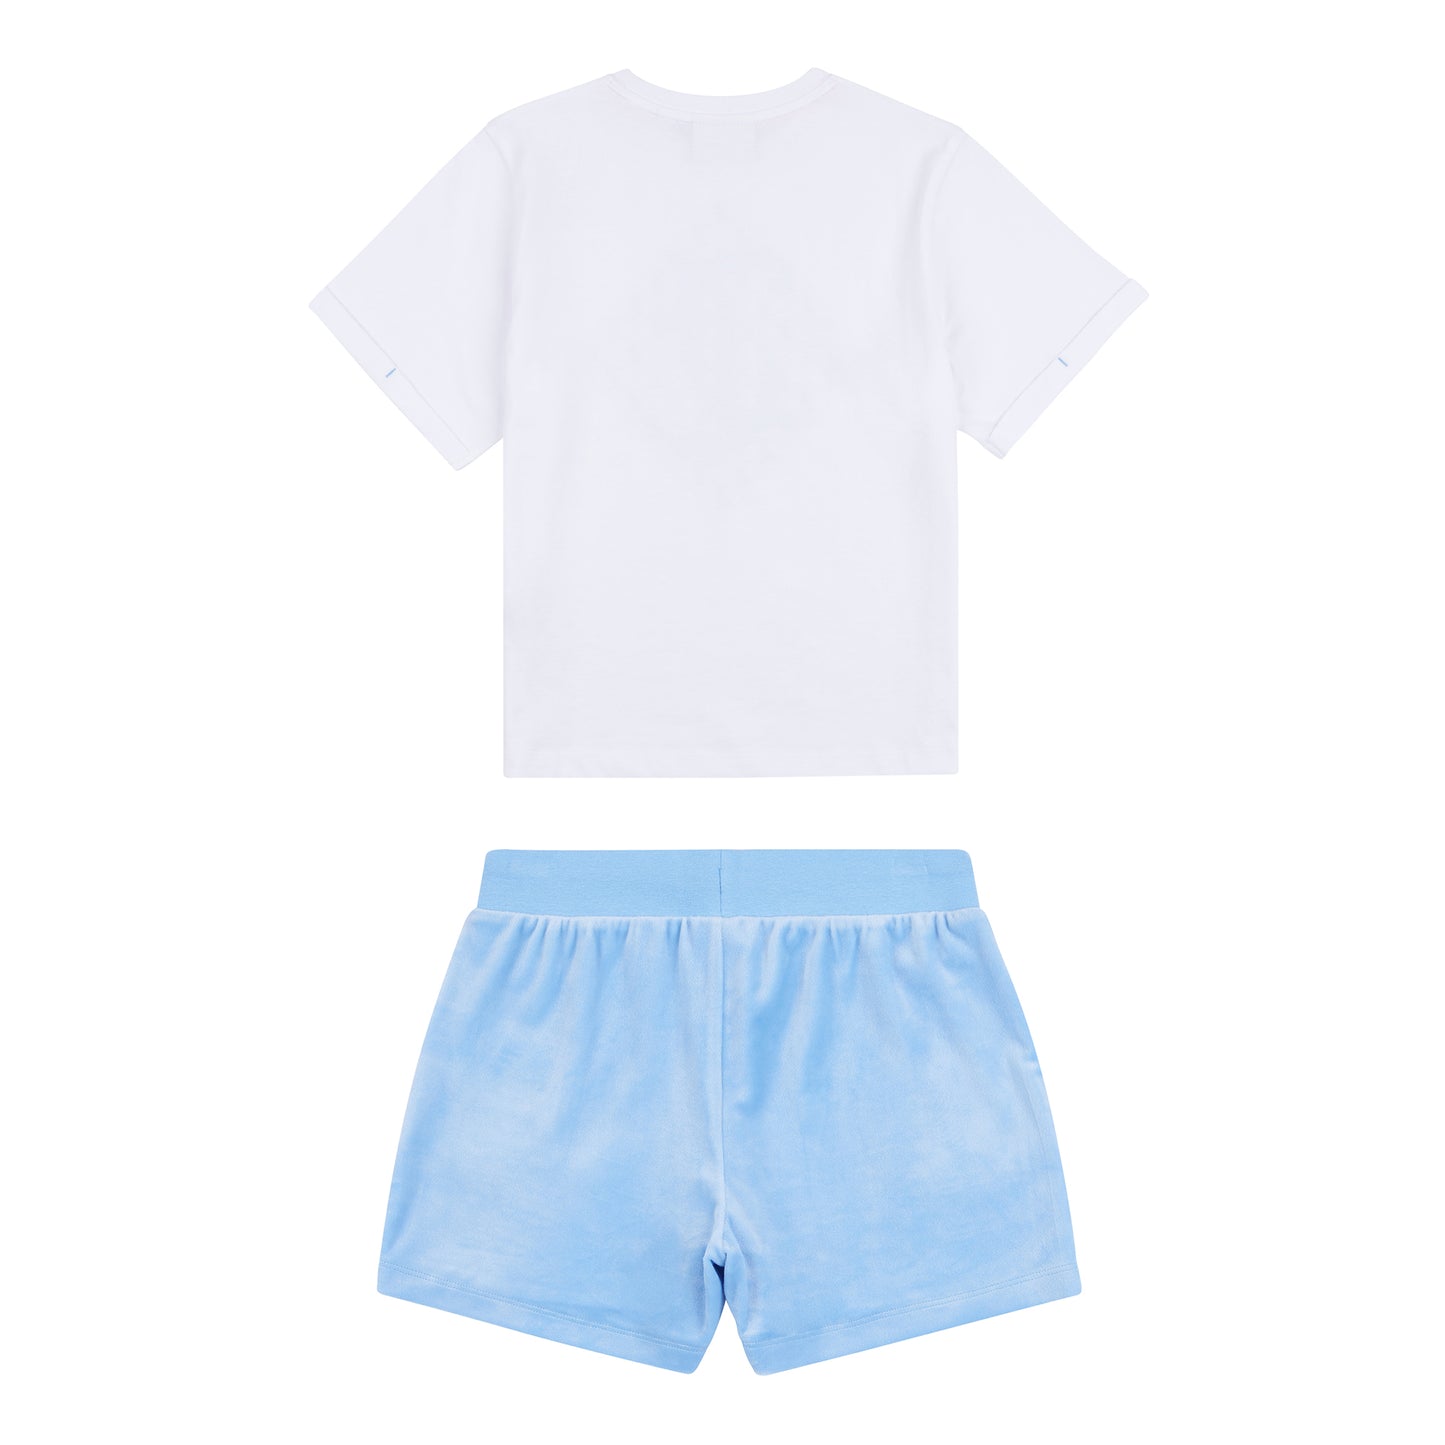 Juicy Couture Girls Della Robbia Blue T shirt and Velore Shorts Set